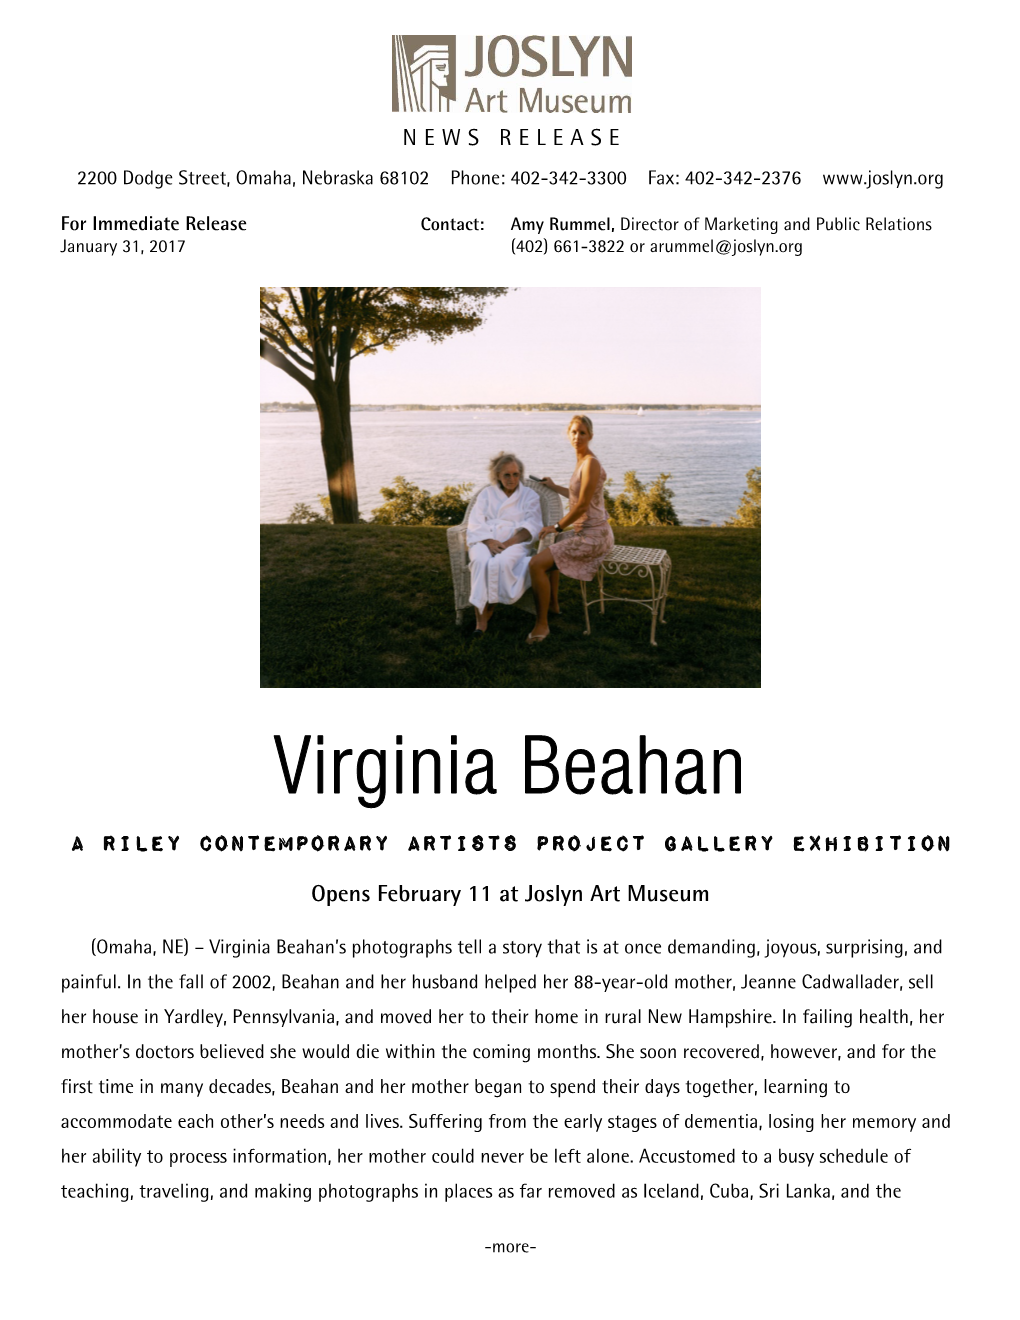 Joslyn's Contemporary Artists Project Gallery Showcases Photographer Virginia Beahan